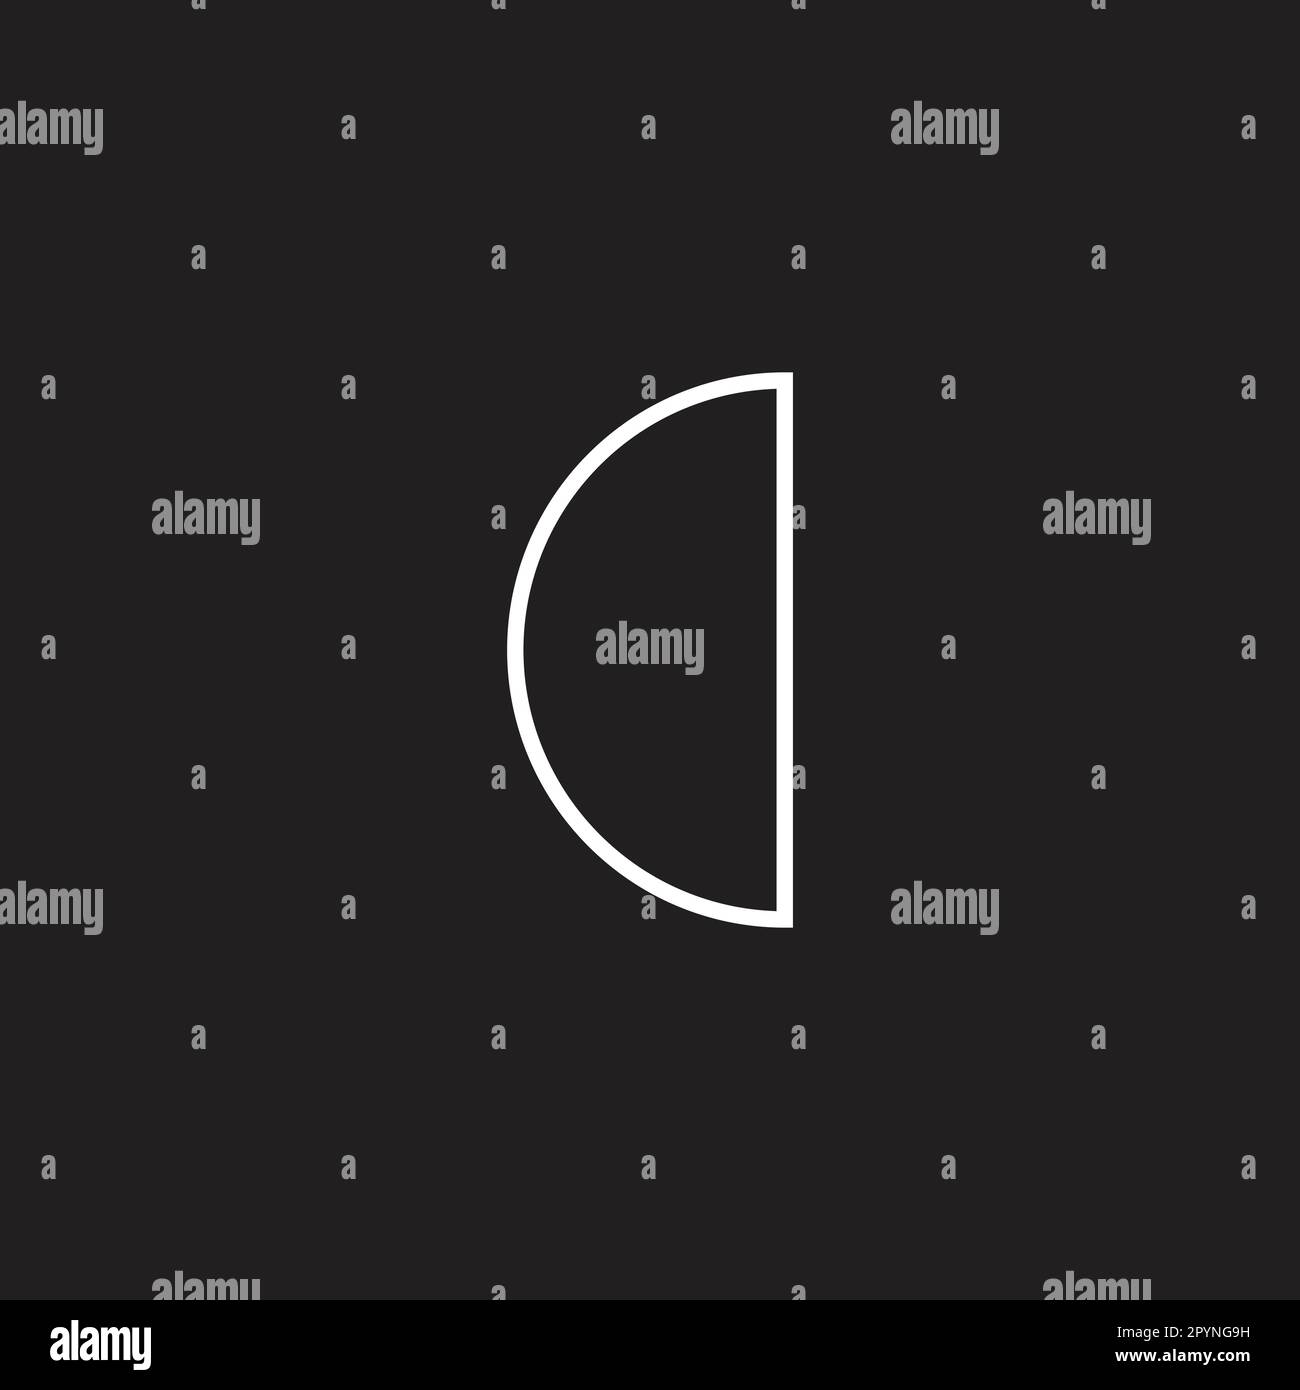 Crescent Moon Geometric Shape Logo Template PNG vector in SVG, PDF